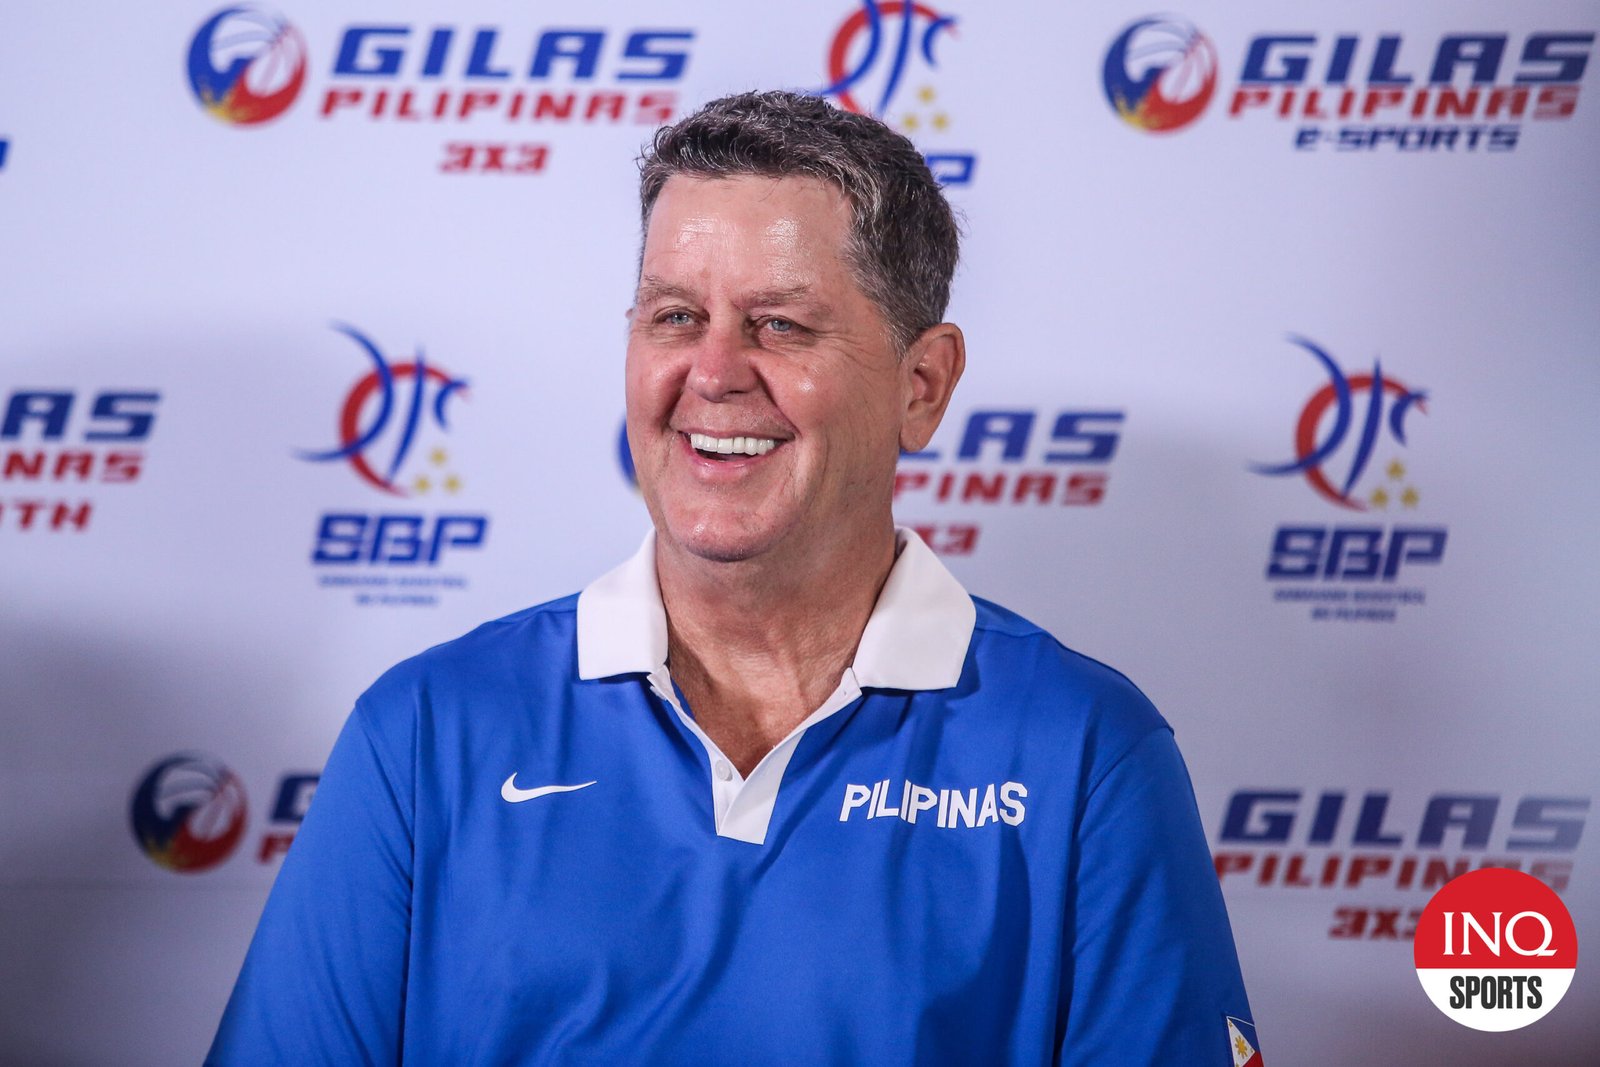 Paris 2024 or LA 2028, Tim Cone wants Olympic stint for Gilas